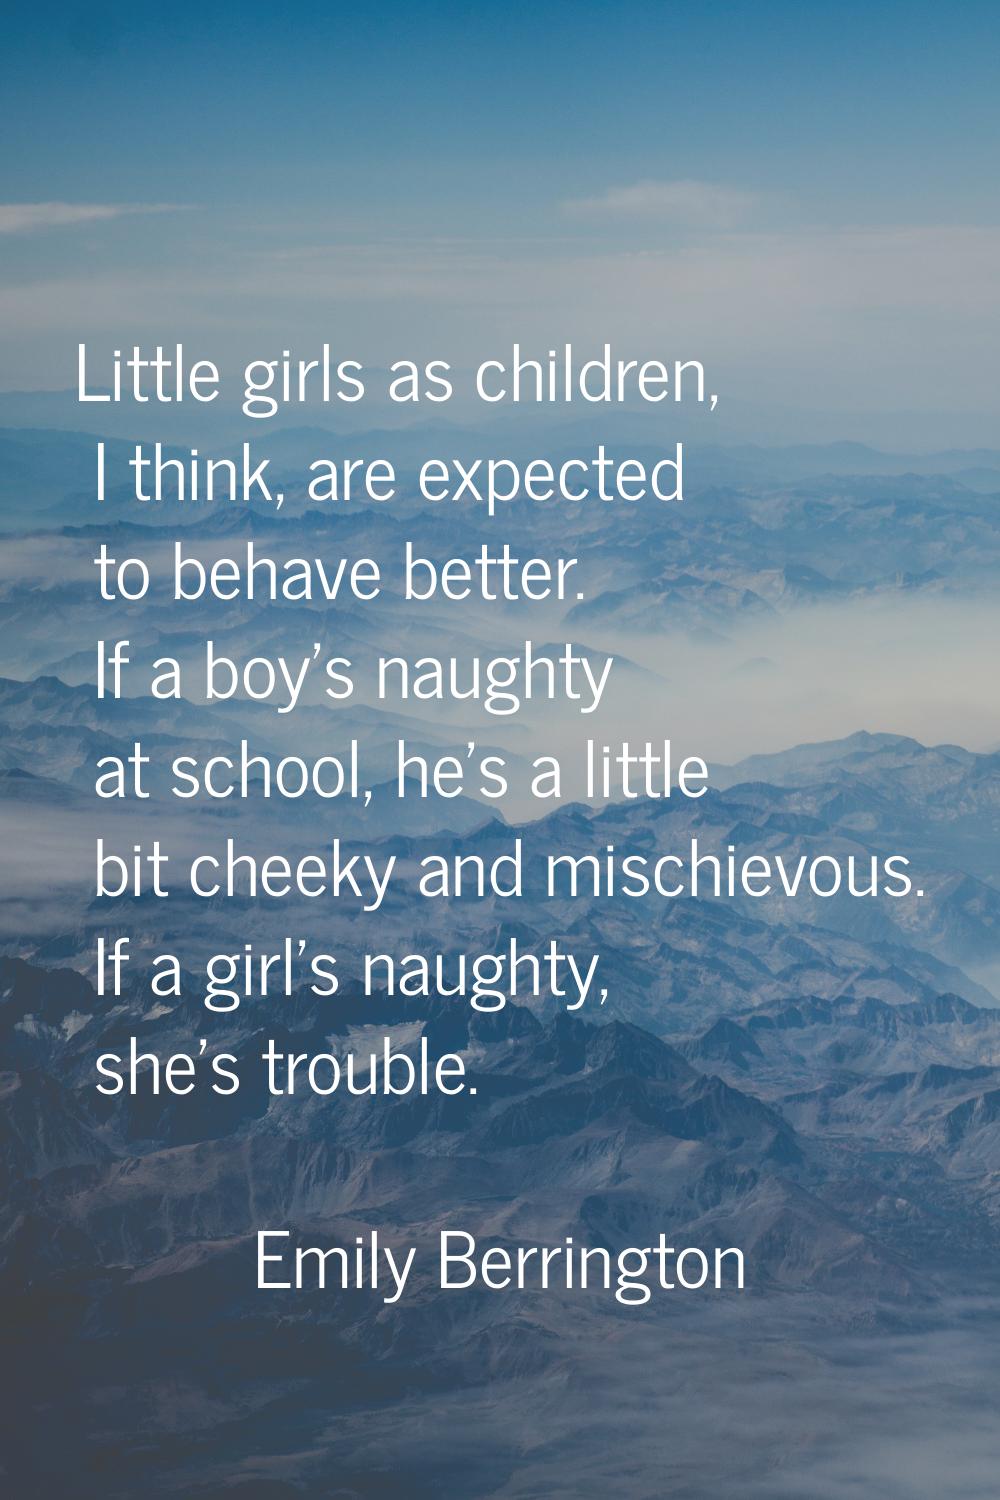 Little girls as children, I think, are expected to behave better. If a boy's naughty at school, he'